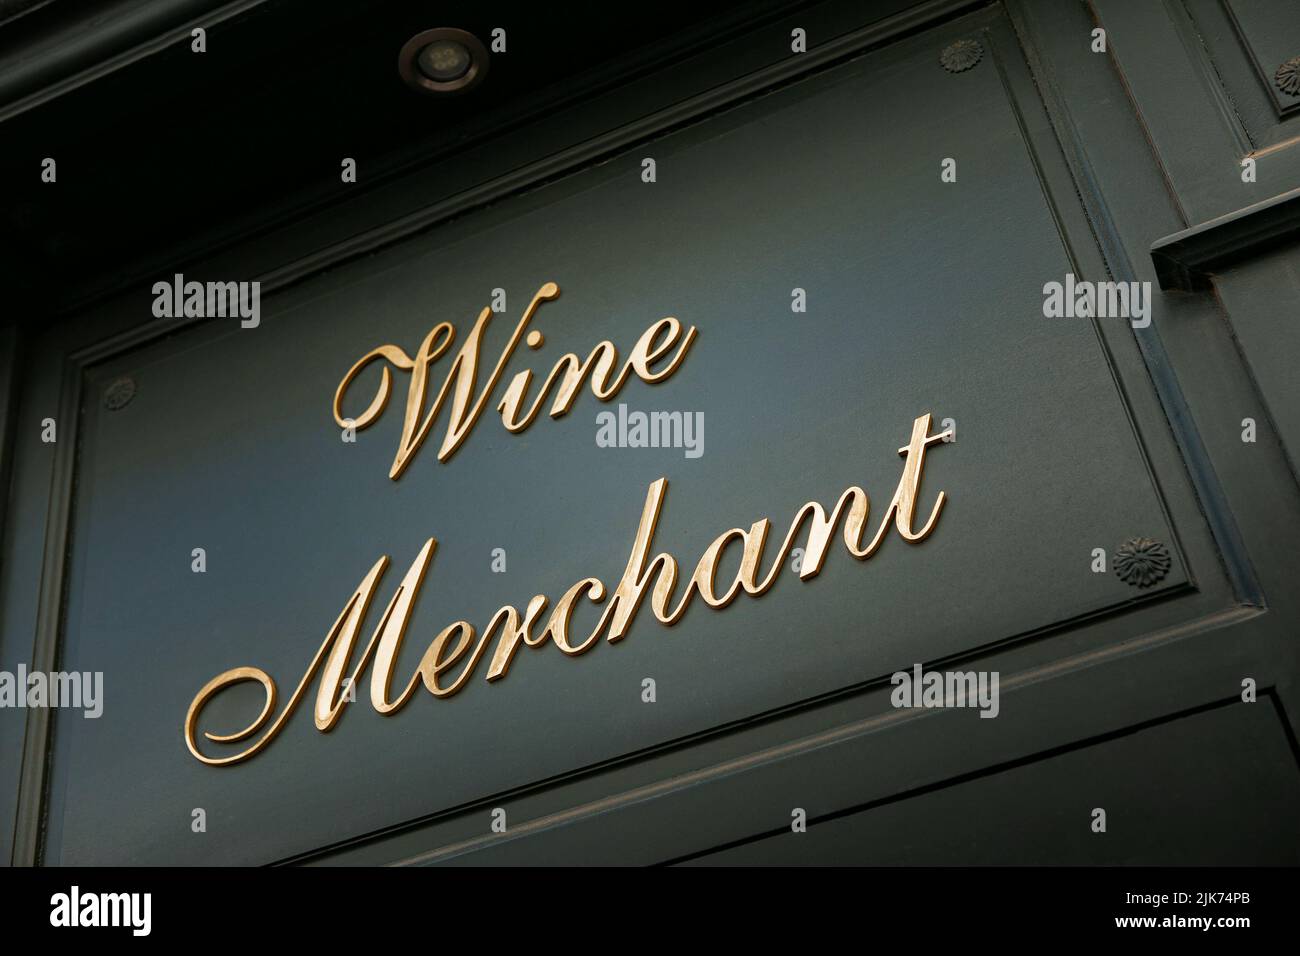 Facade of a winery store Stock Photo